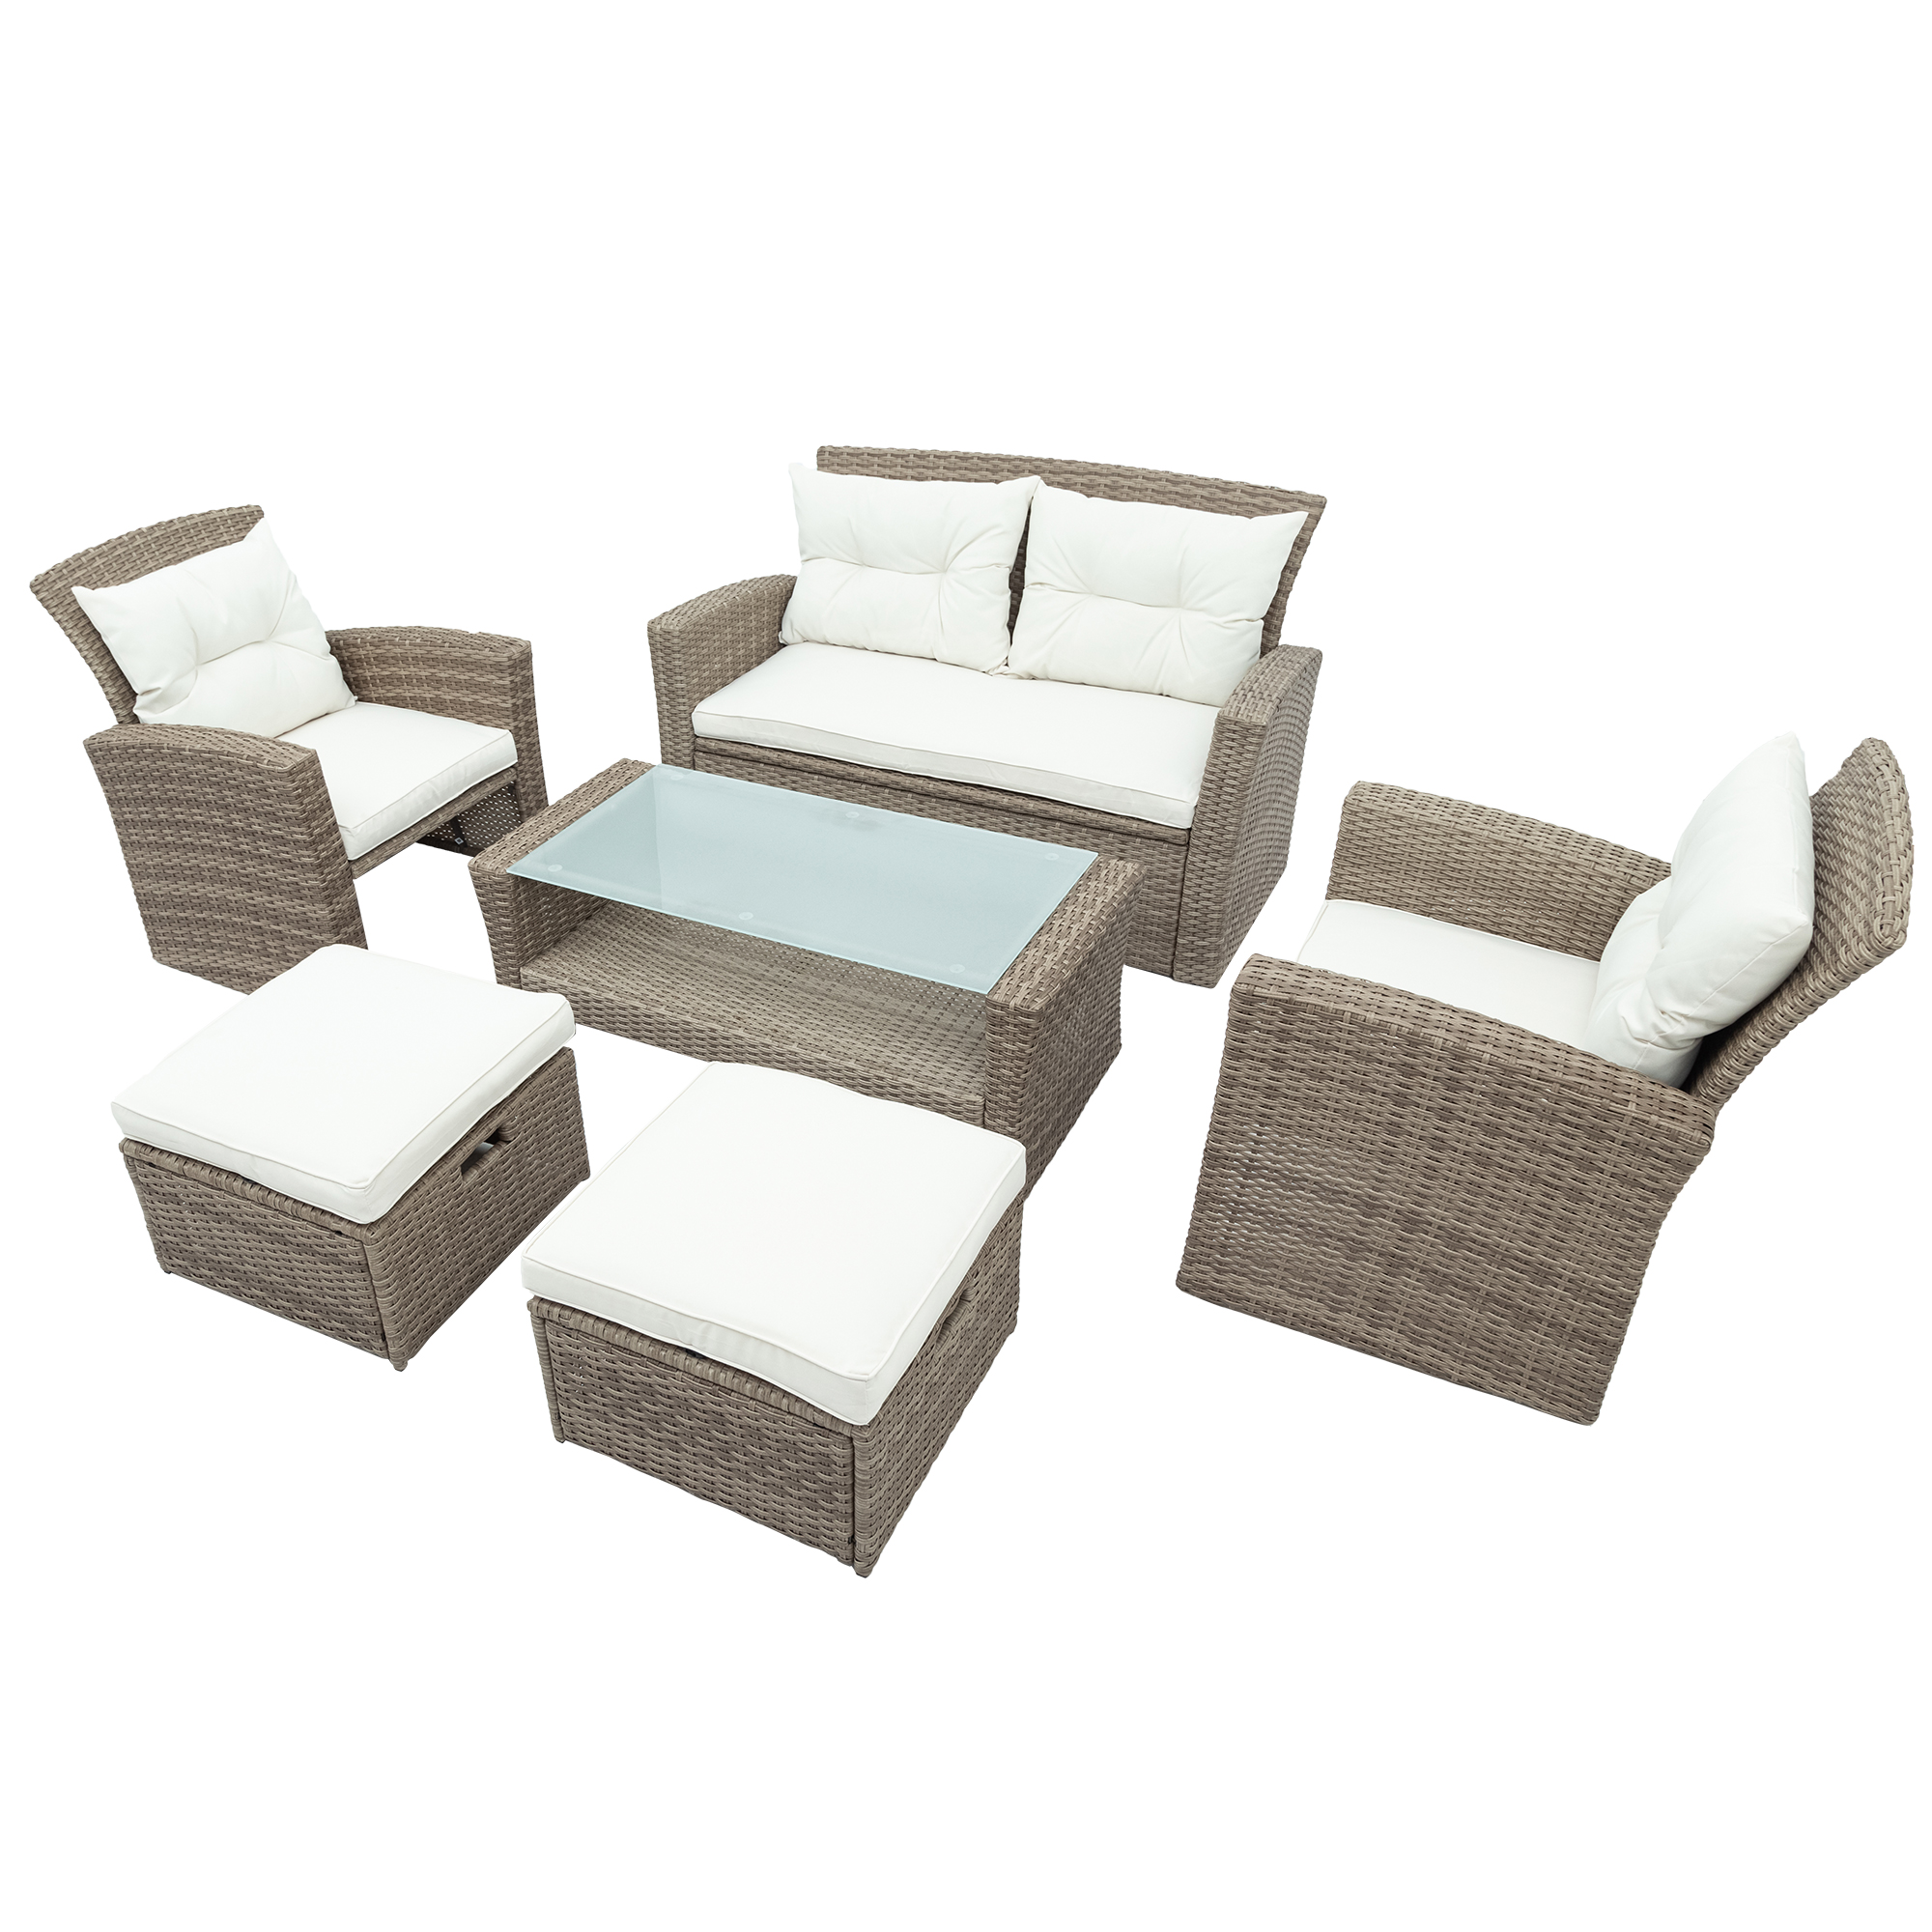 SESSLIFE 6-Piece Outdoor Sectional Sofa Set, Gray Wicker Patio Seating Sets with 19.6" High Tea Table and Soft Cushions, All-Weather Backyard Porch Garden Conversation Set - image 5 of 9